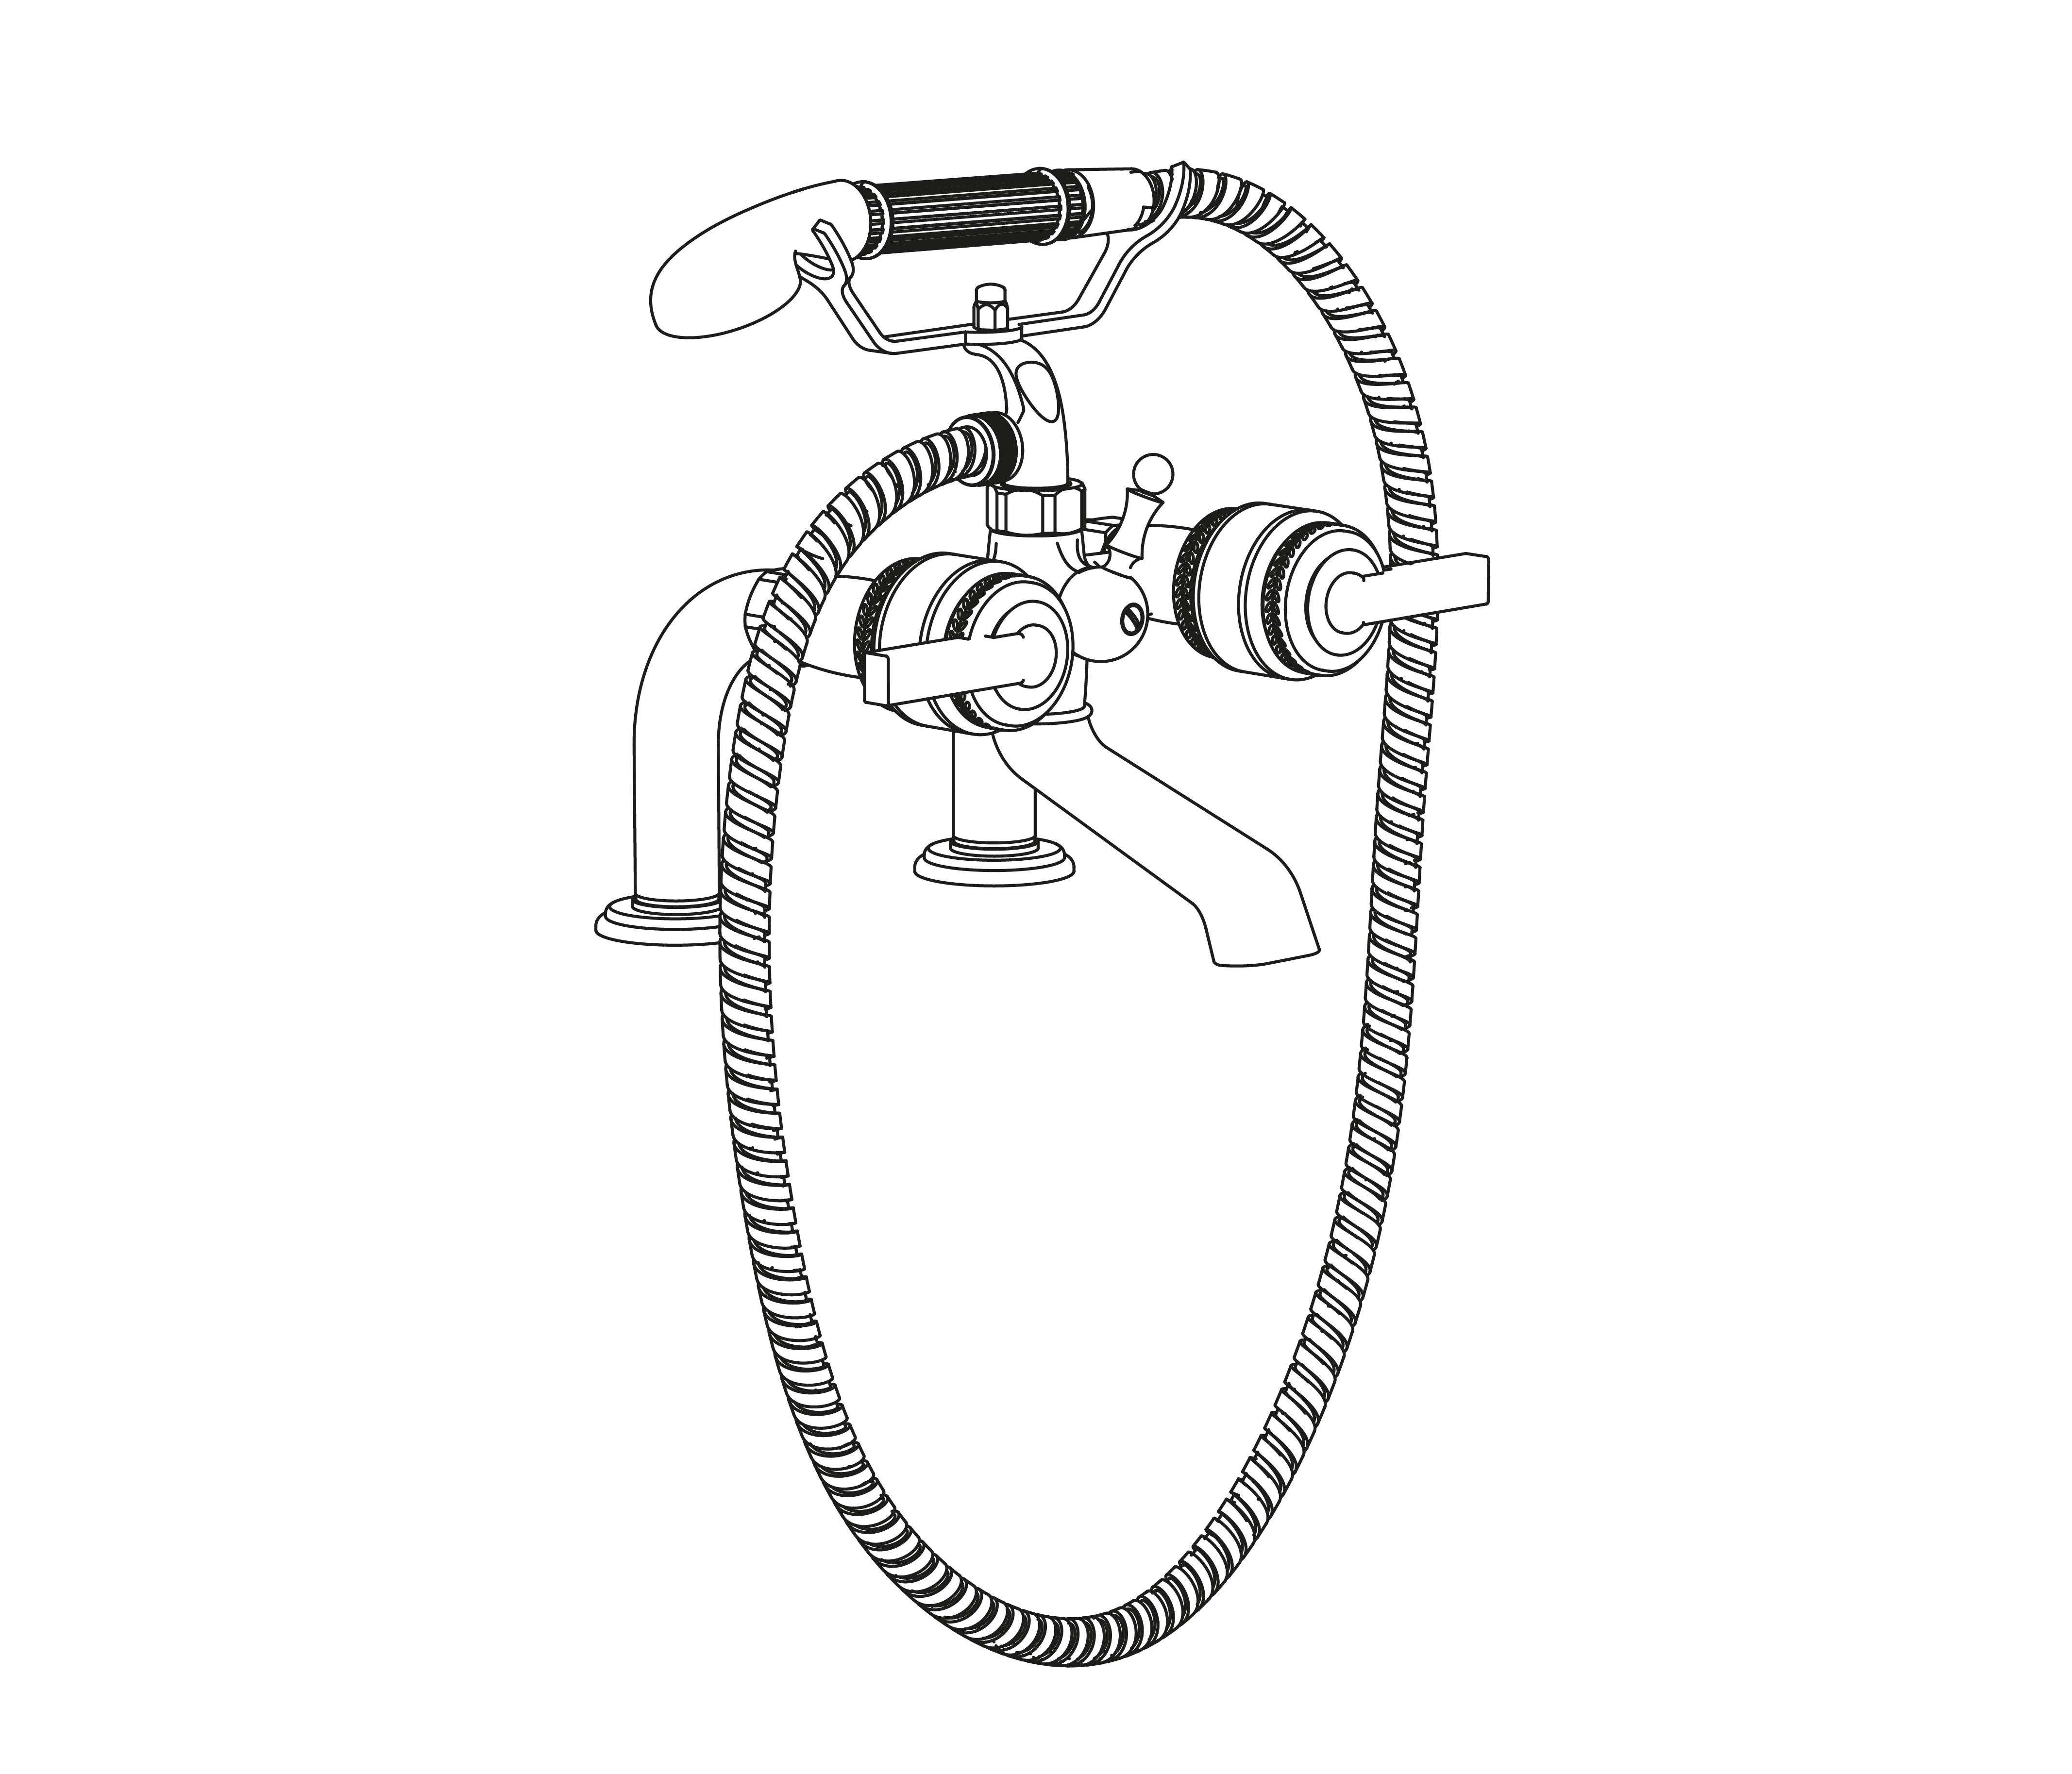 S151-3306 Rim mounted bath and shower mixer